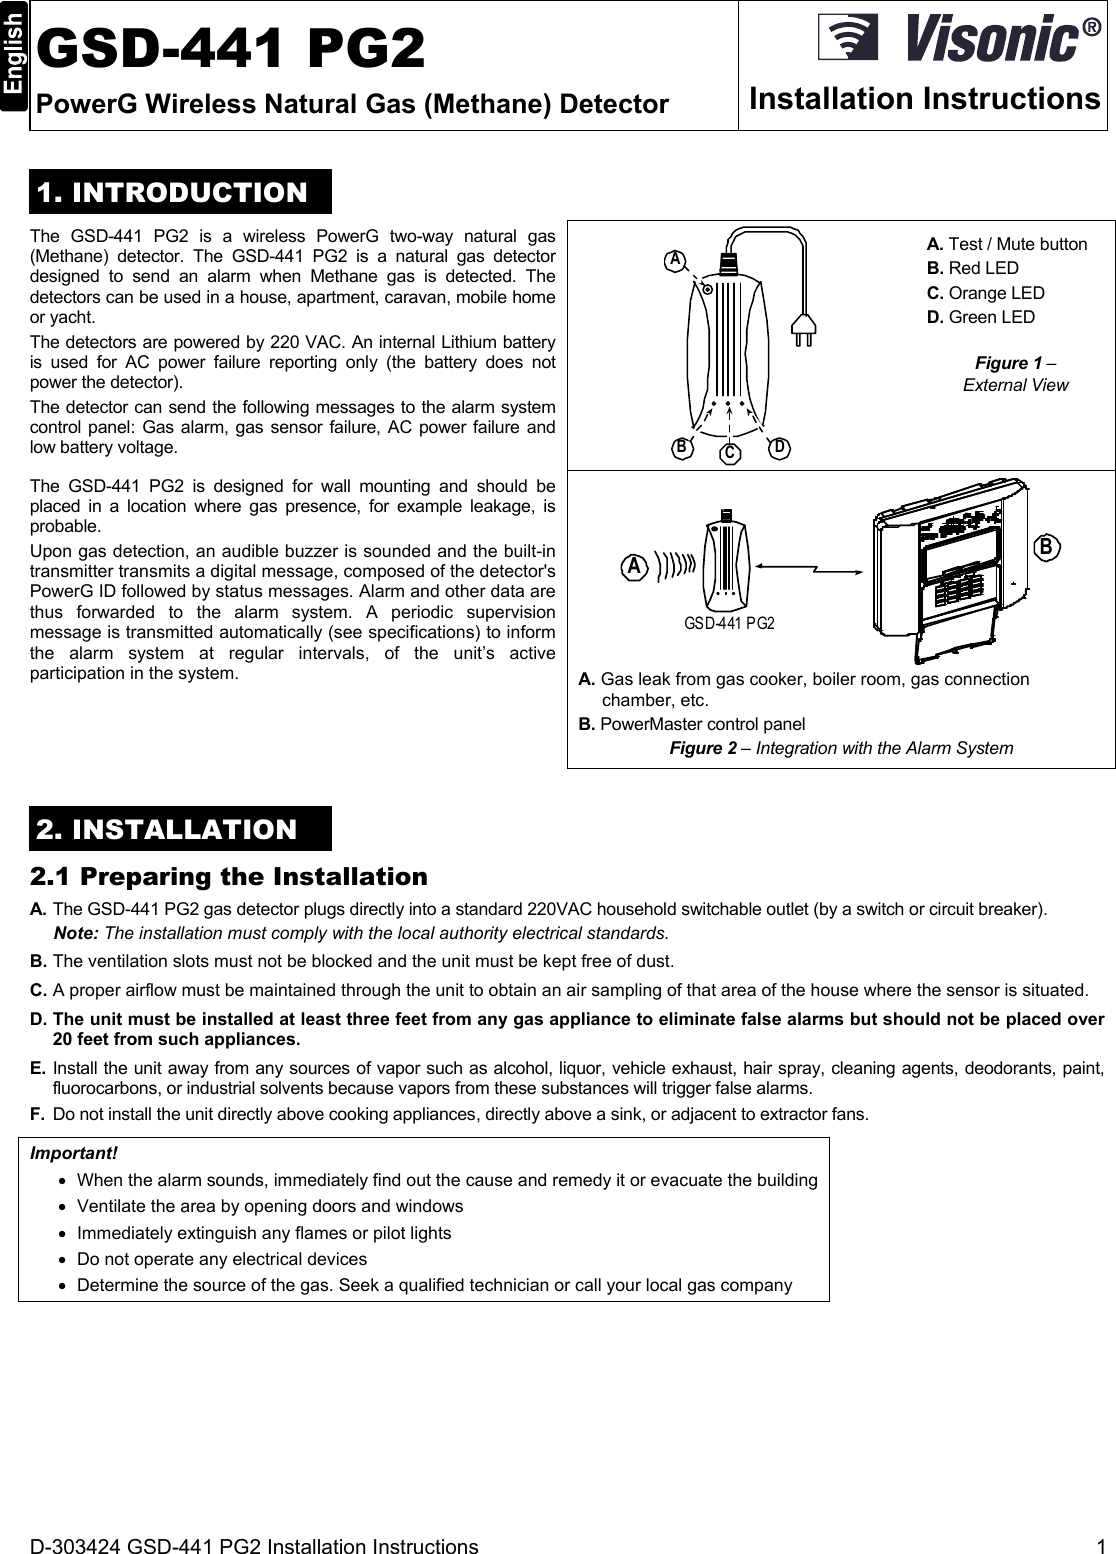 D-303424 GSD-441 PG2 Installation Instructions  1  GSD-441 PG2 PowerG Wireless Natural Gas (Methane) Detector  Installation Instructions1. INTRODUCTION The GSD-441 PG2 is a wireless PowerG two-way natural gas (Methane) detector. The GSD-441 PG2 is a natural gas detector designed to send an alarm when Methane gas is detected. The detectors can be used in a house, apartment, caravan, mobile home or yacht. The detectors are powered by 220 VAC. An internal Lithium battery is used for AC power failure reporting only (the battery does not power the detector).  The detector can send the following messages to the alarm system control panel: Gas alarm, gas sensor failure, AC power failure and low battery voltage. ABCD A. Test / Mute button B. Red LED  C. Orange LED D. Green LED Figure 1 –  External View The GSD-441 PG2 is designed for wall mounting and should be placed in a location where gas presence, for example leakage, is probable. Upon gas detection, an audible buzzer is sounded and the built-in transmitter transmits a digital message, composed of the detector&apos;s PowerG ID followed by status messages. Alarm and other data are thus forwarded to the alarm system. A periodic supervision message is transmitted automatically (see specifications) to inform the alarm system at regular intervals, of the unit’s active participation in the system. GSD-441 PG2AB A. Gas leak from gas cooker, boiler room, gas connection chamber, etc. B. PowerMaster control panel Figure 2 – Integration with the Alarm System 2. INSTALLATION 2.1 Preparing the Installation A. The GSD-441 PG2 gas detector plugs directly into a standard 220VAC household switchable outlet (by a switch or circuit breaker). Note: The installation must comply with the local authority electrical standards. B. The ventilation slots must not be blocked and the unit must be kept free of dust. C. A proper airflow must be maintained through the unit to obtain an air sampling of that area of the house where the sensor is situated. D. The unit must be installed at least three feet from any gas appliance to eliminate false alarms but should not be placed over 20 feet from such appliances. E. Install the unit away from any sources of vapor such as alcohol, liquor, vehicle exhaust, hair spray, cleaning agents, deodorants, paint, fluorocarbons, or industrial solvents because vapors from these substances will trigger false alarms. F.  Do not install the unit directly above cooking appliances, directly above a sink, or adjacent to extractor fans. Important!   When the alarm sounds, immediately find out the cause and remedy it or evacuate the building   Ventilate the area by opening doors and windows   Immediately extinguish any flames or pilot lights   Do not operate any electrical devices   Determine the source of the gas. Seek a qualified technician or call your local gas company  